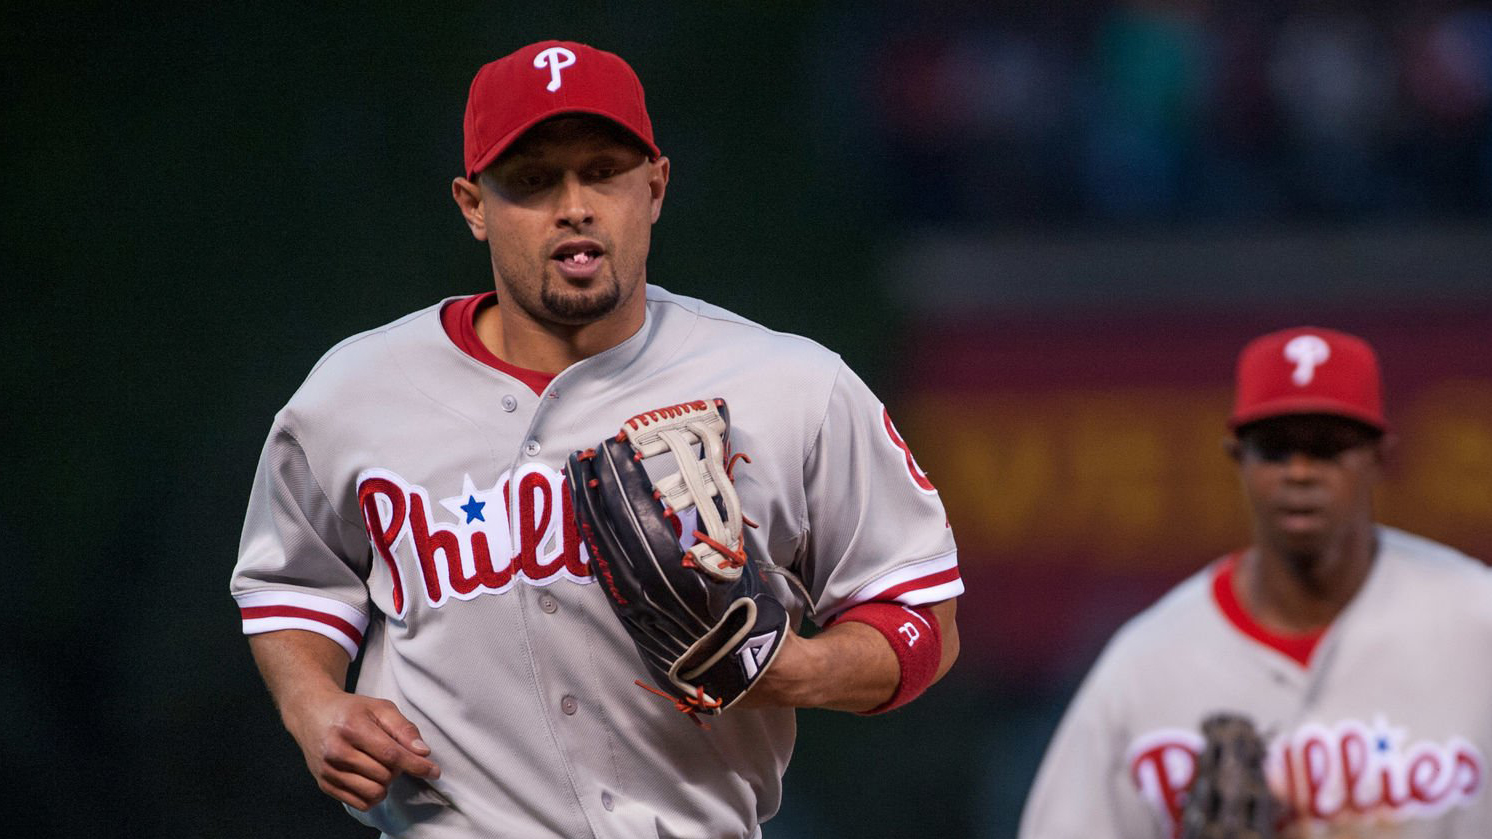 Shane Victorino says he wanted to return to Phillies 